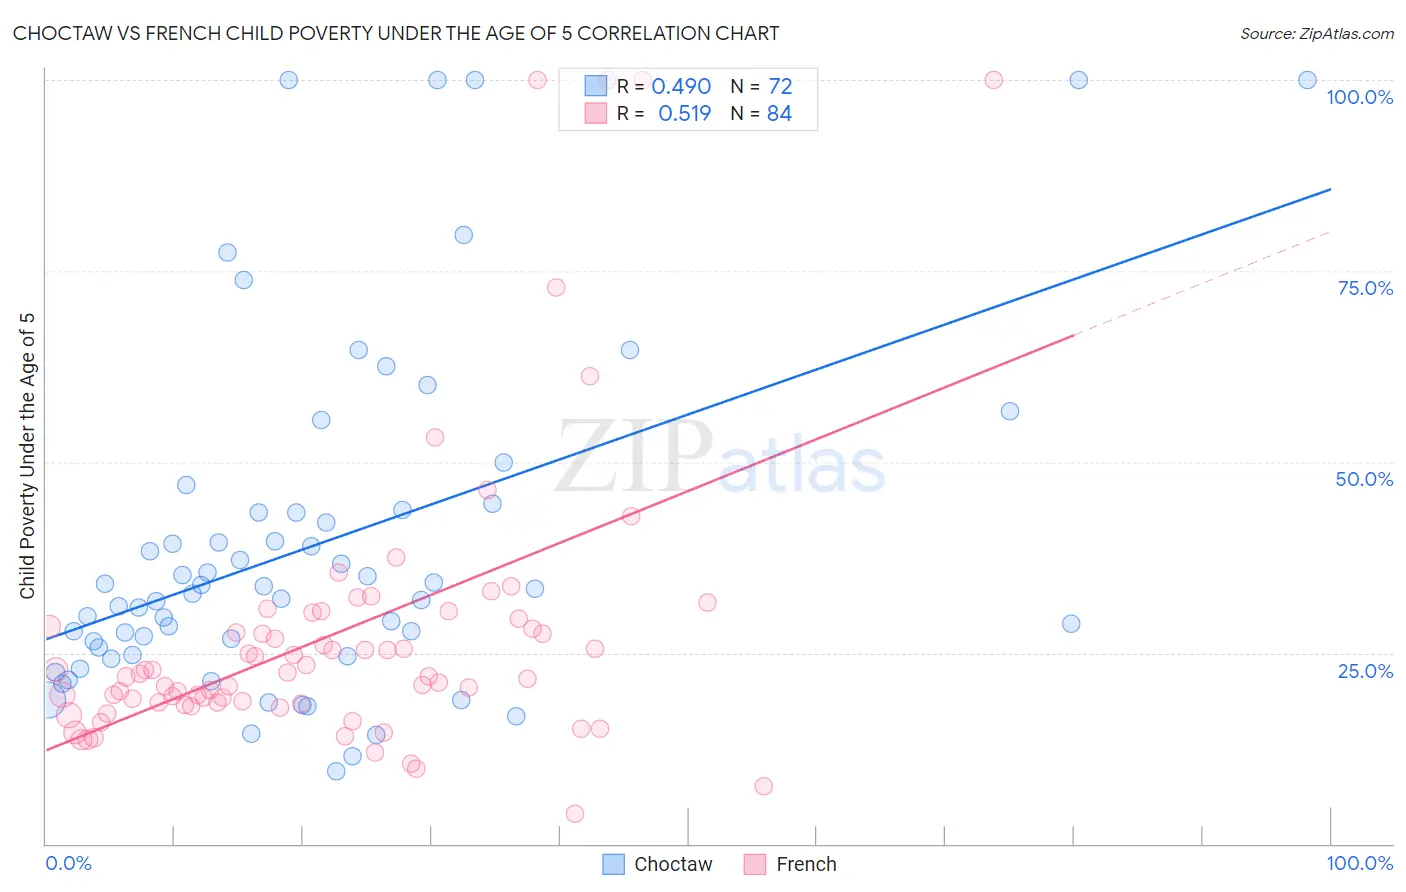 Choctaw vs French Child Poverty Under the Age of 5